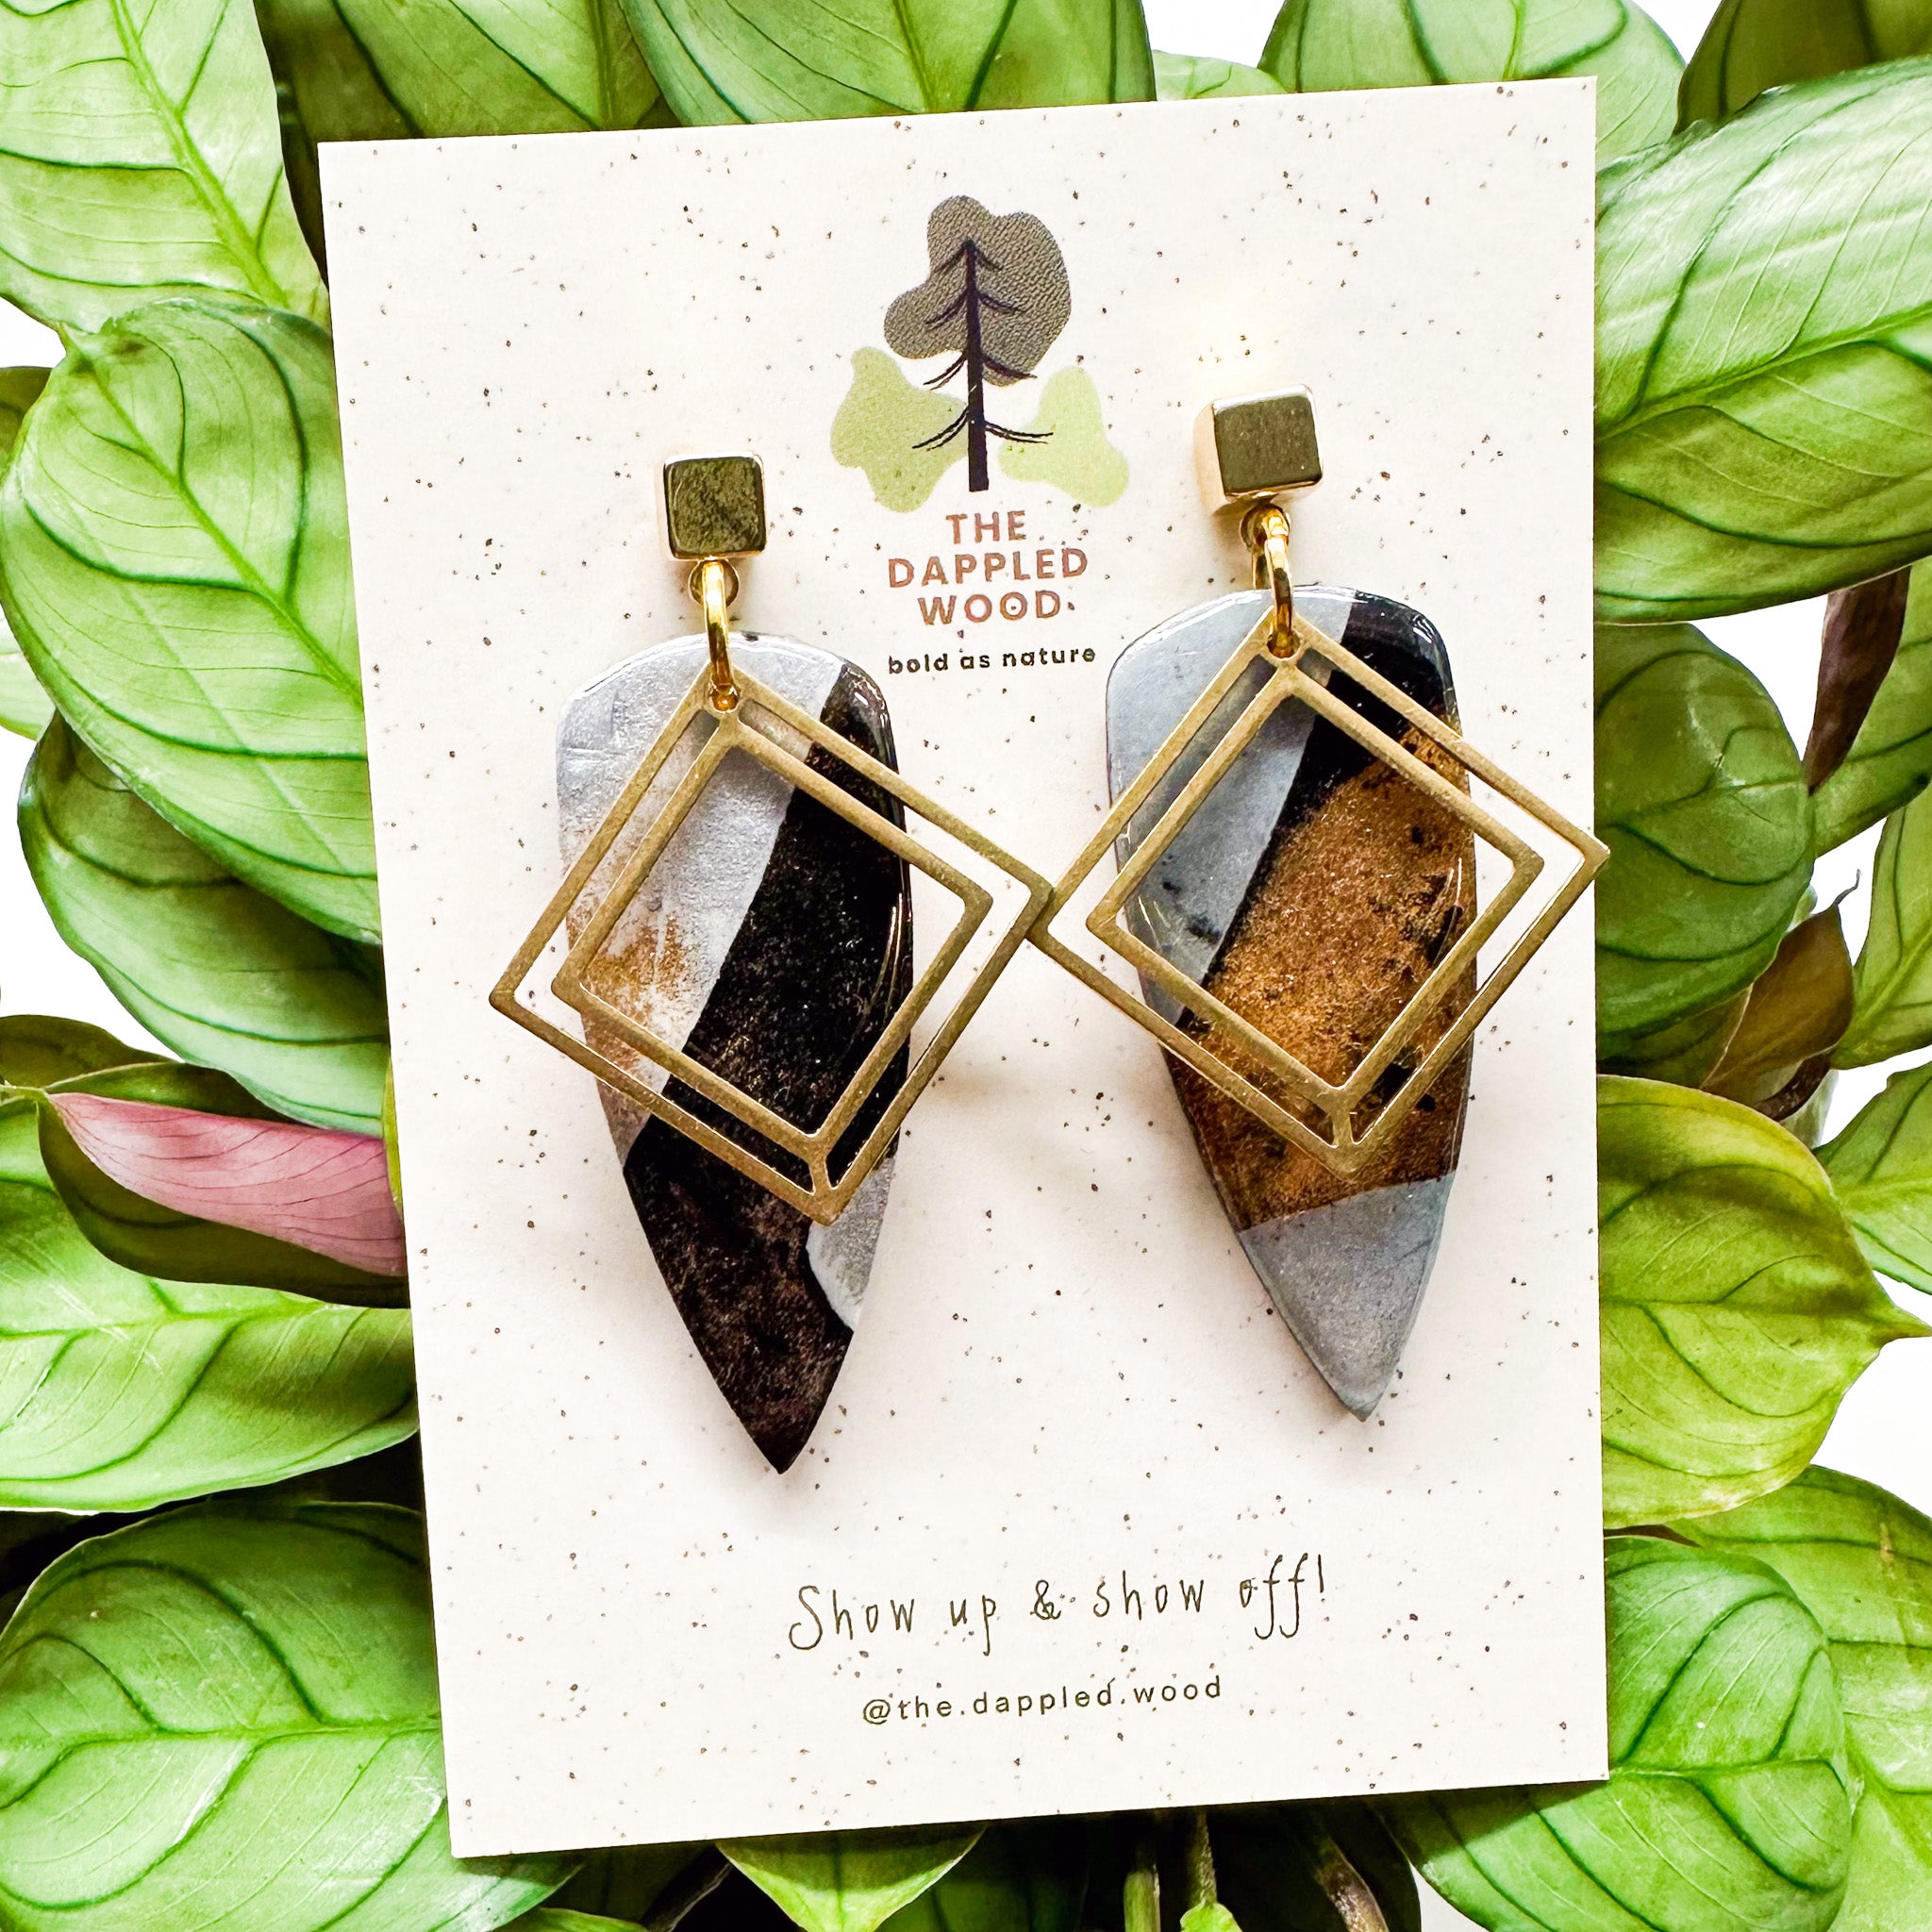 Unique geometric polymer clay earrings with gold frames and earthy toned insets, hanging on a white display card with green foliage in the backdrop. The card showcases 'The Dappled Wood' logo and the slogan 'Show up & show off!'.